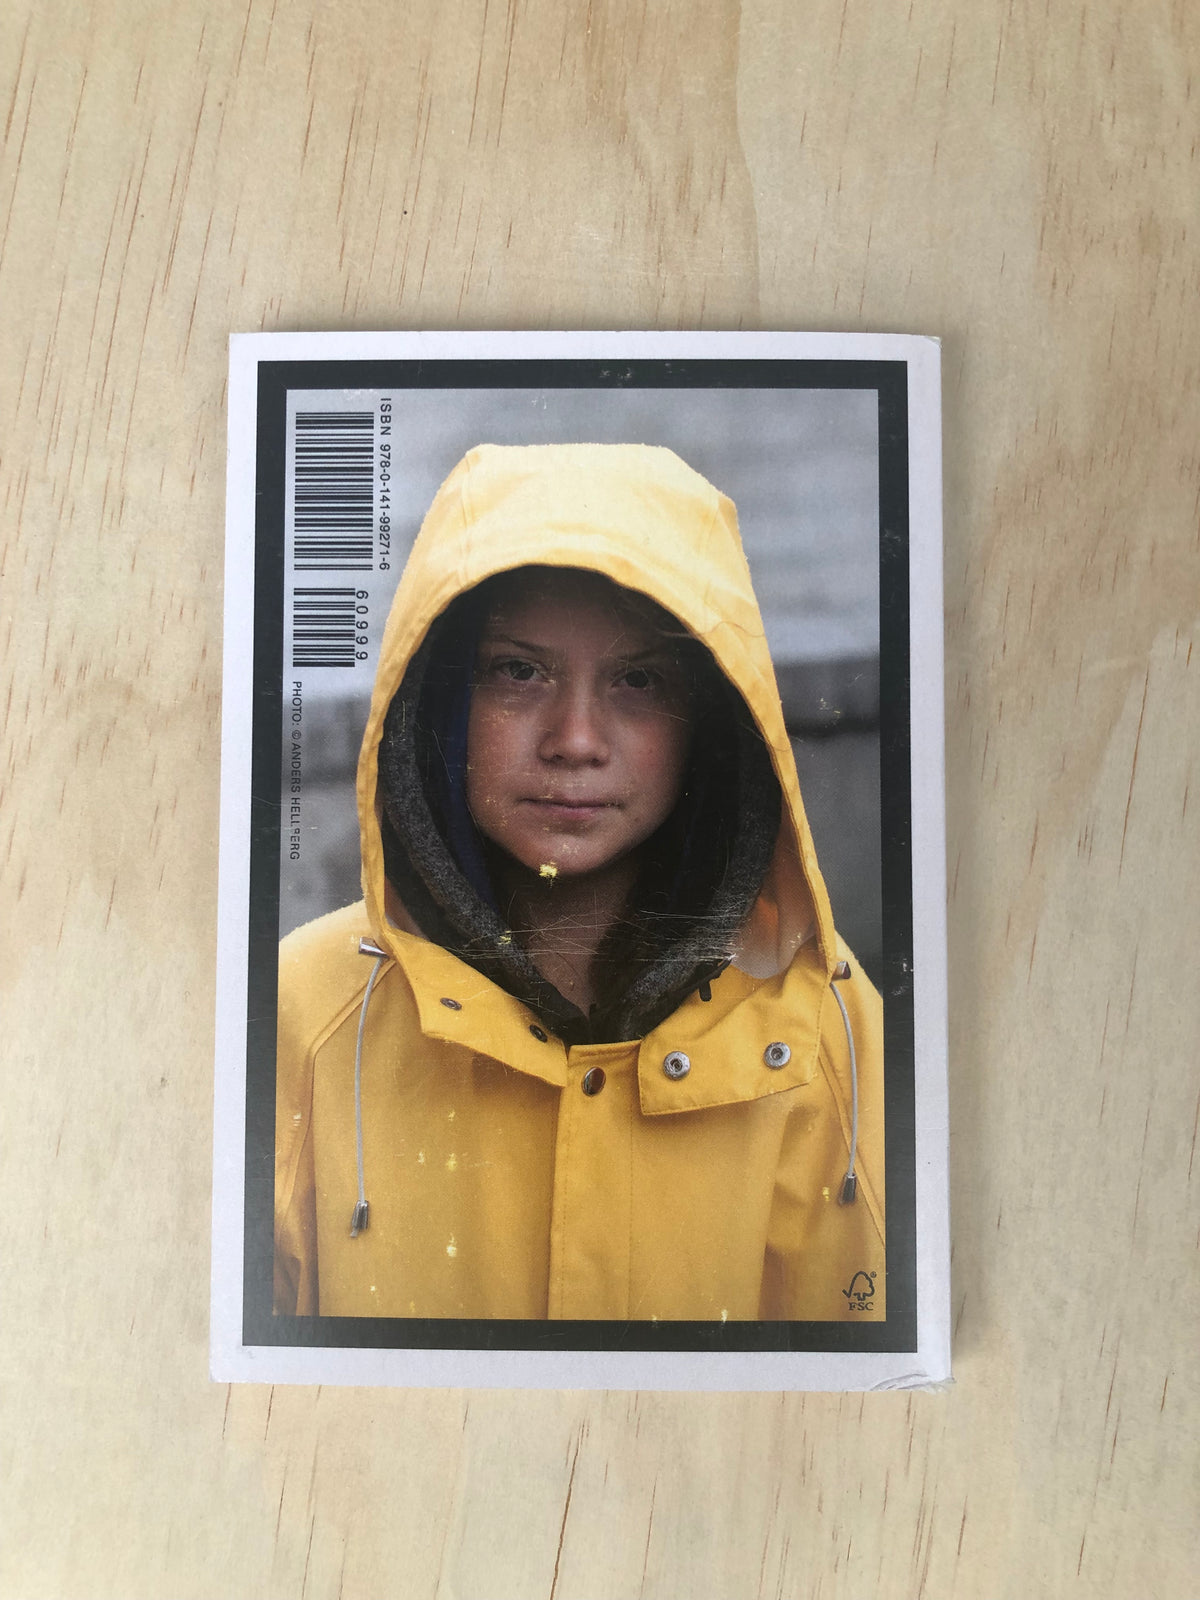 No One Is Too Small To Make a Difference - Greta Thunberg